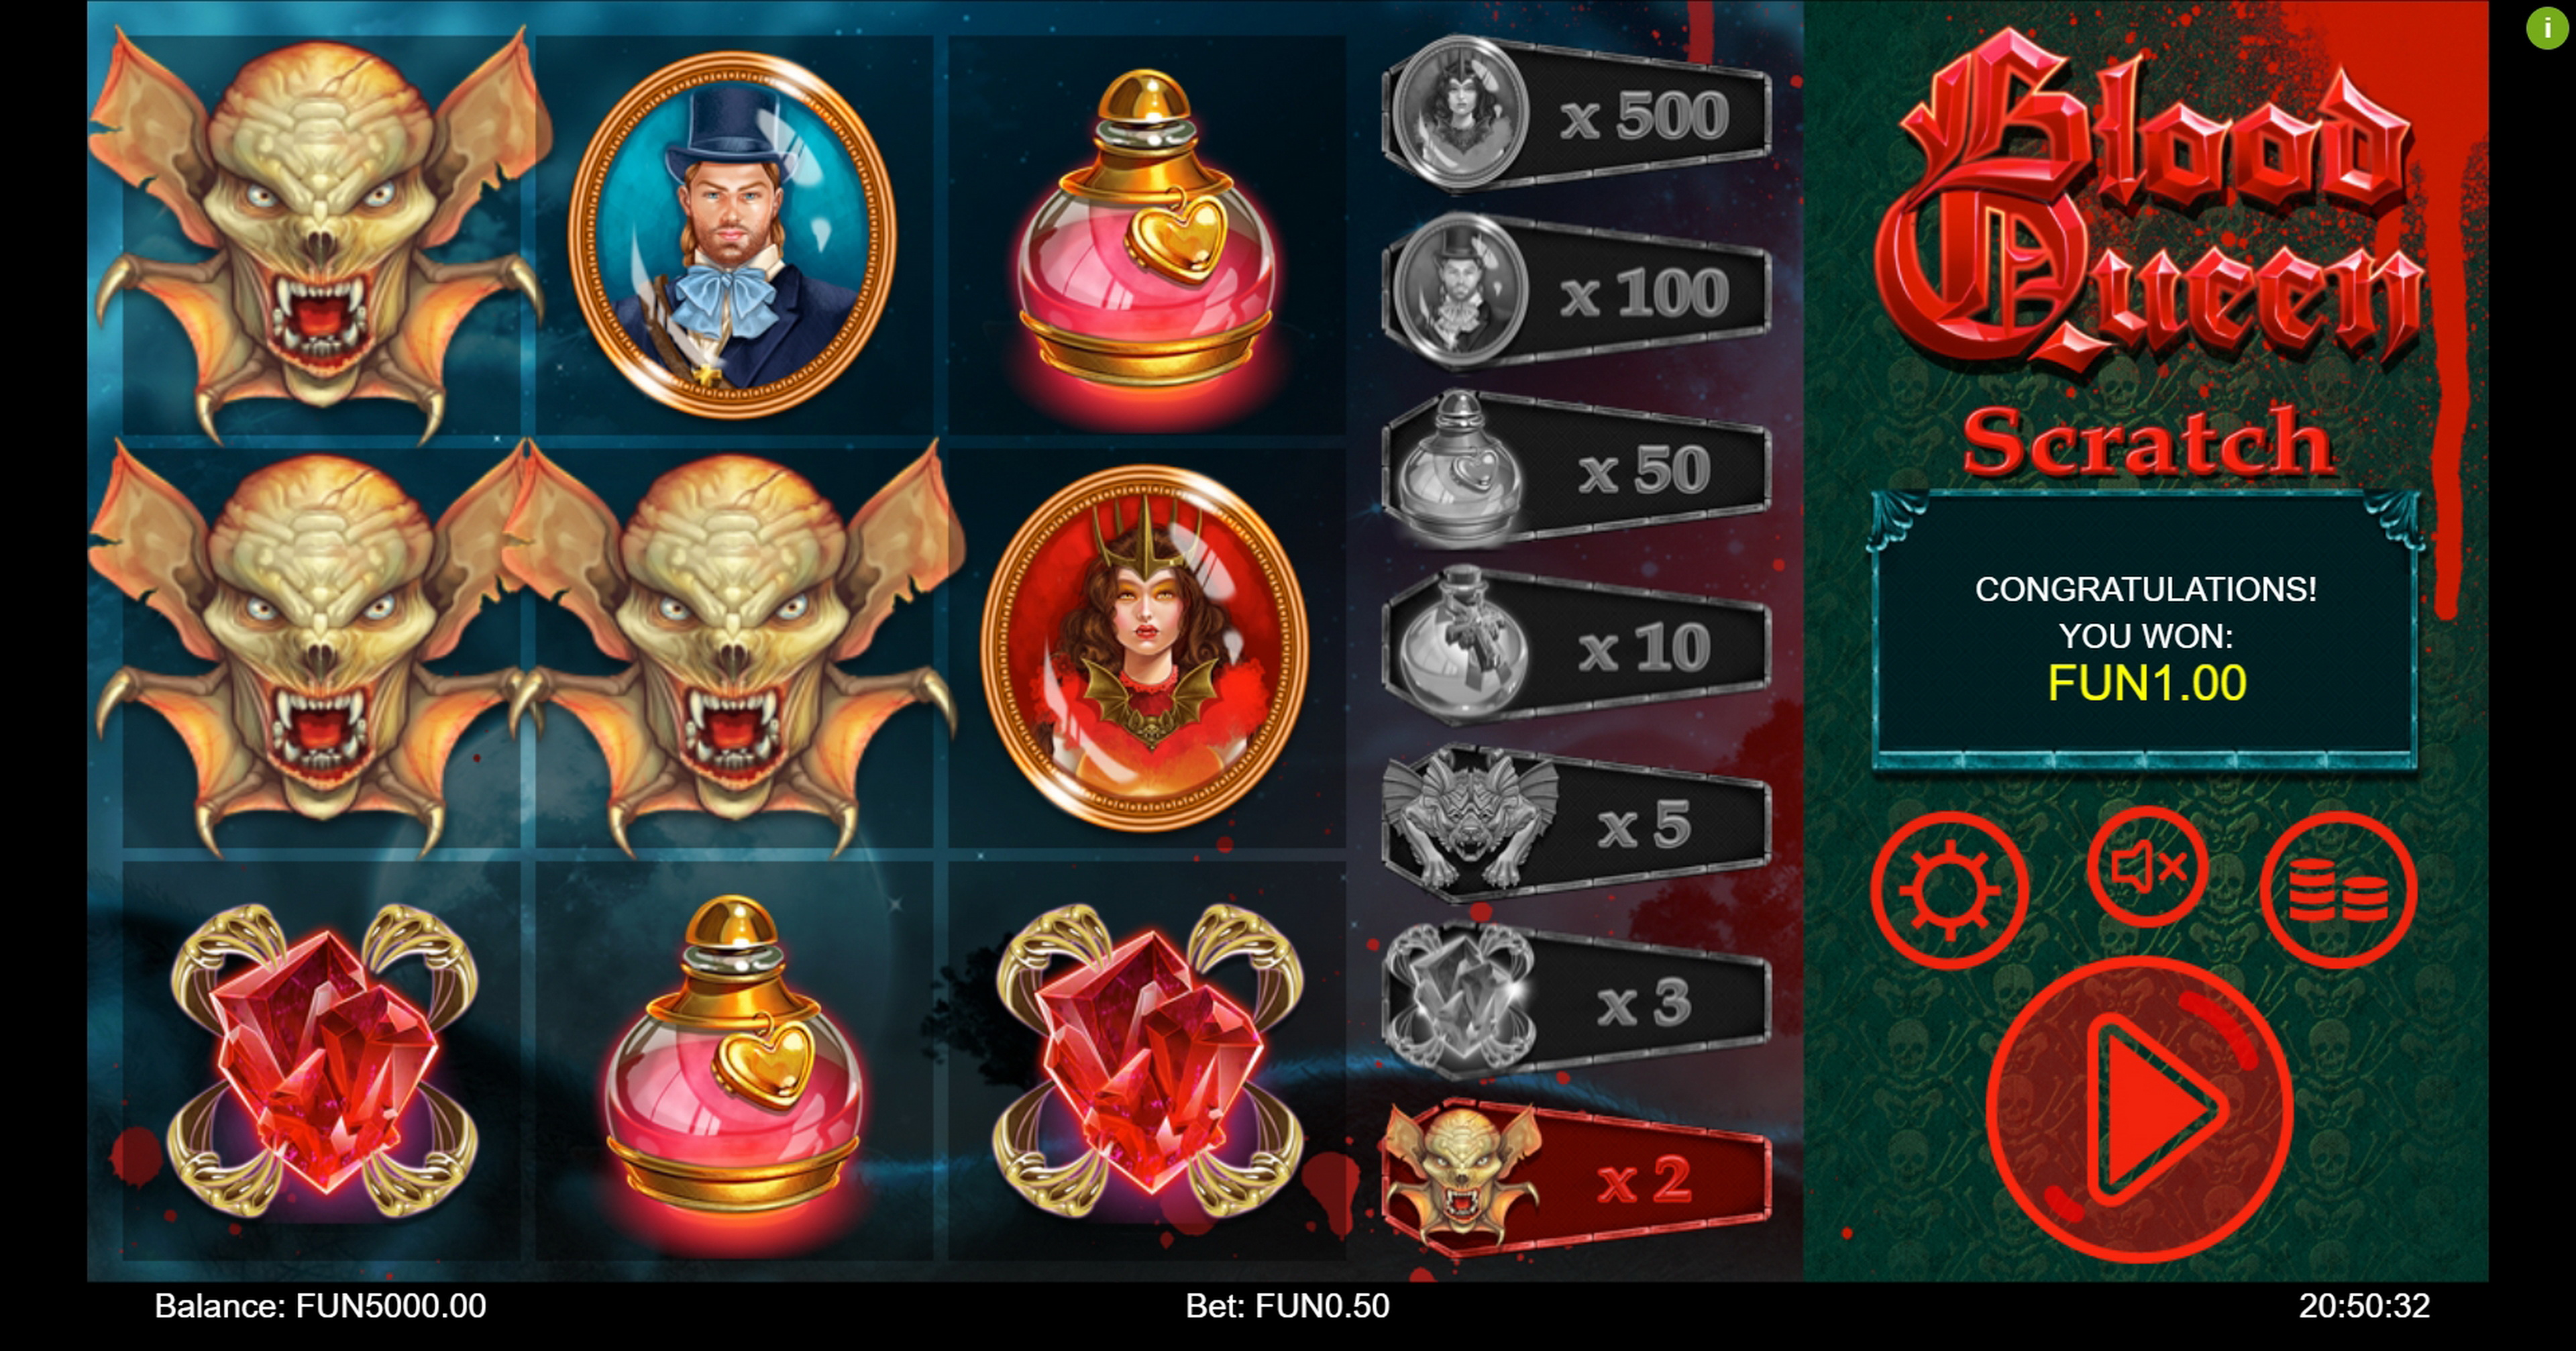 Win Money in Blood Queen Scratch Free Slot Game by Iron Dog Studios